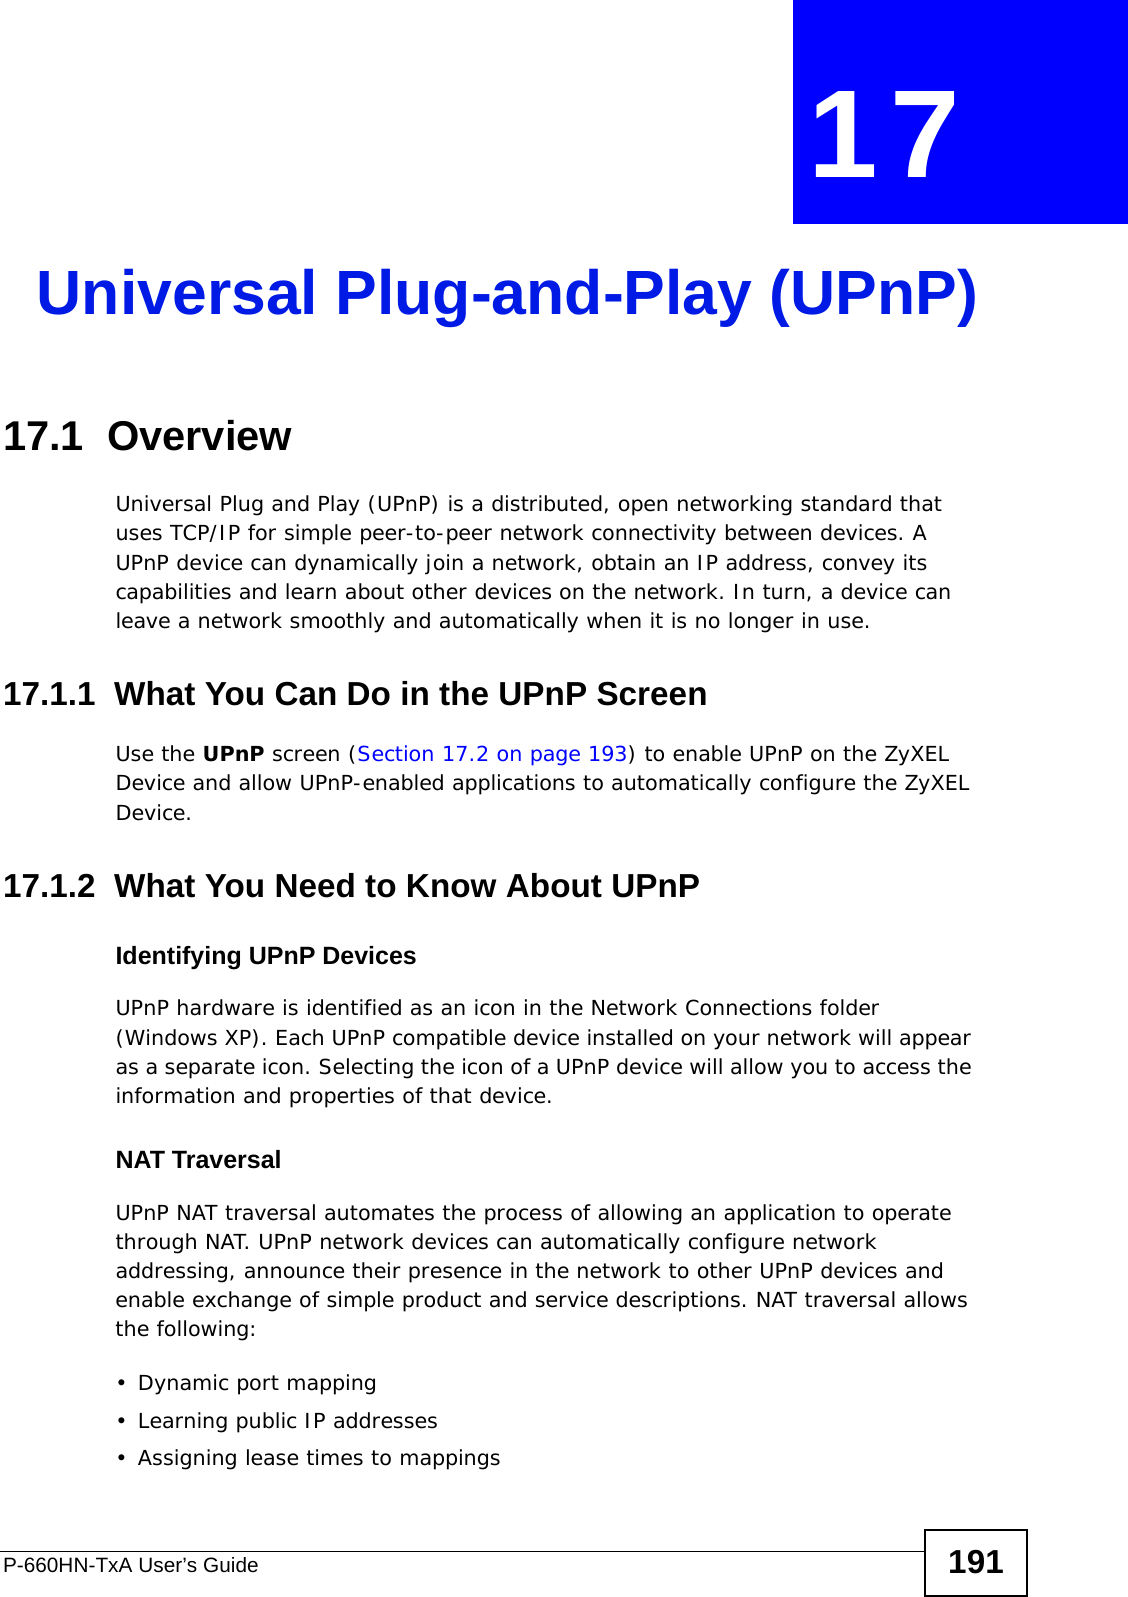 P-660HN-TxA User’s Guide 191CHAPTER  17 Universal Plug-and-Play (UPnP)17.1  OverviewUniversal Plug and Play (UPnP) is a distributed, open networking standard that uses TCP/IP for simple peer-to-peer network connectivity between devices. A UPnP device can dynamically join a network, obtain an IP address, convey its capabilities and learn about other devices on the network. In turn, a device can leave a network smoothly and automatically when it is no longer in use.17.1.1  What You Can Do in the UPnP ScreenUse the UPnP screen (Section 17.2 on page 193) to enable UPnP on the ZyXEL Device and allow UPnP-enabled applications to automatically configure the ZyXEL Device.17.1.2  What You Need to Know About UPnPIdentifying UPnP DevicesUPnP hardware is identified as an icon in the Network Connections folder (Windows XP). Each UPnP compatible device installed on your network will appear as a separate icon. Selecting the icon of a UPnP device will allow you to access the information and properties of that device. NAT TraversalUPnP NAT traversal automates the process of allowing an application to operate through NAT. UPnP network devices can automatically configure network addressing, announce their presence in the network to other UPnP devices and enable exchange of simple product and service descriptions. NAT traversal allows the following:• Dynamic port mapping• Learning public IP addresses• Assigning lease times to mappings